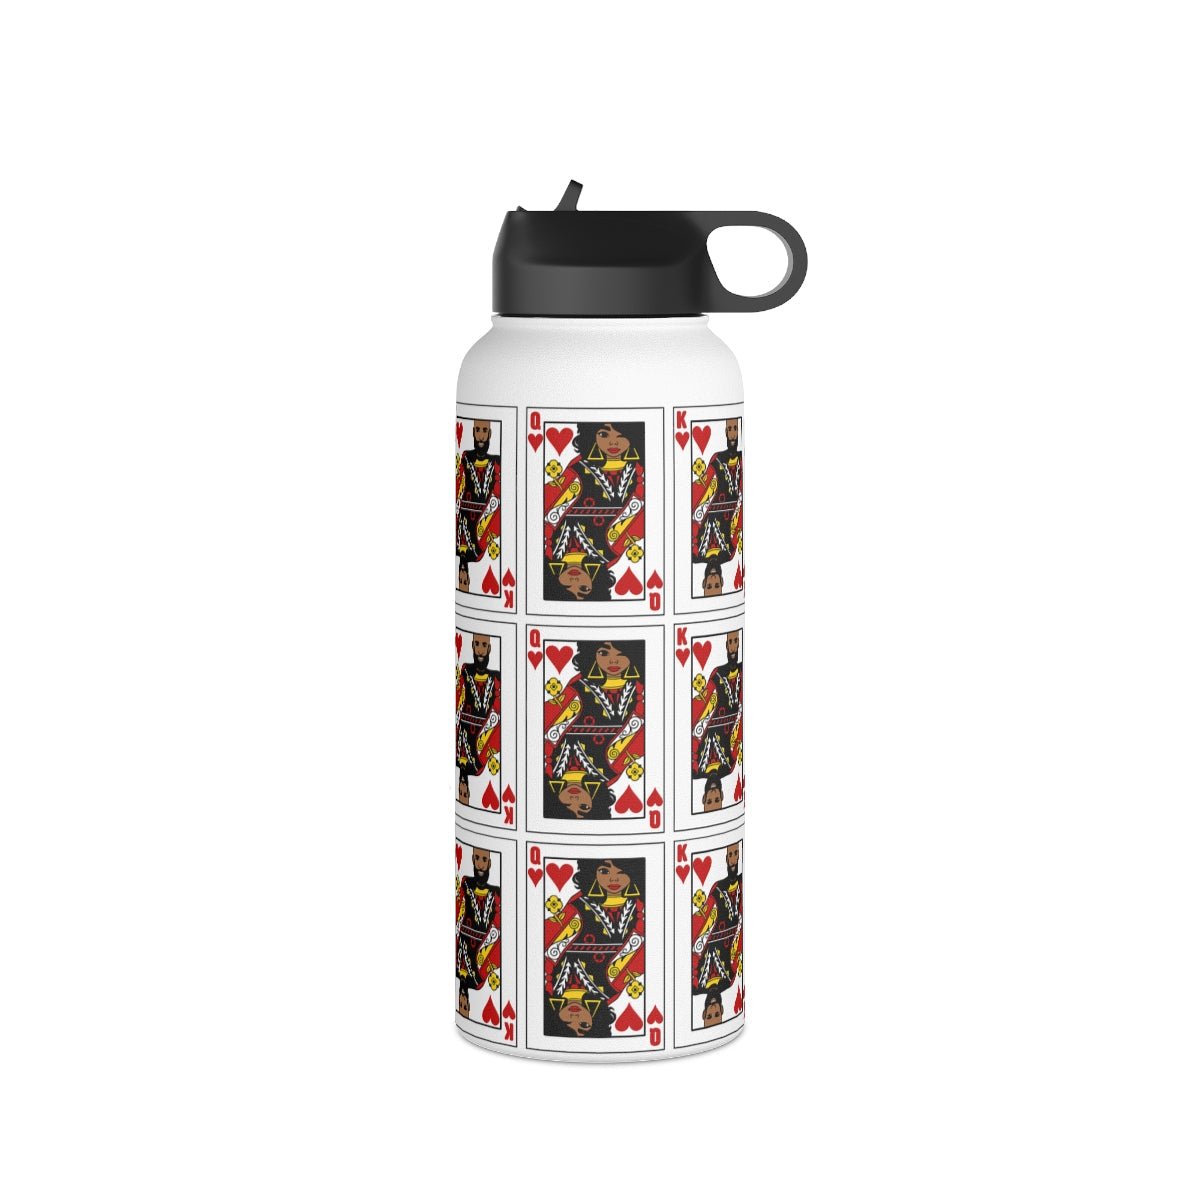 King Queen 32oz Water Bottle - The Trini Gee